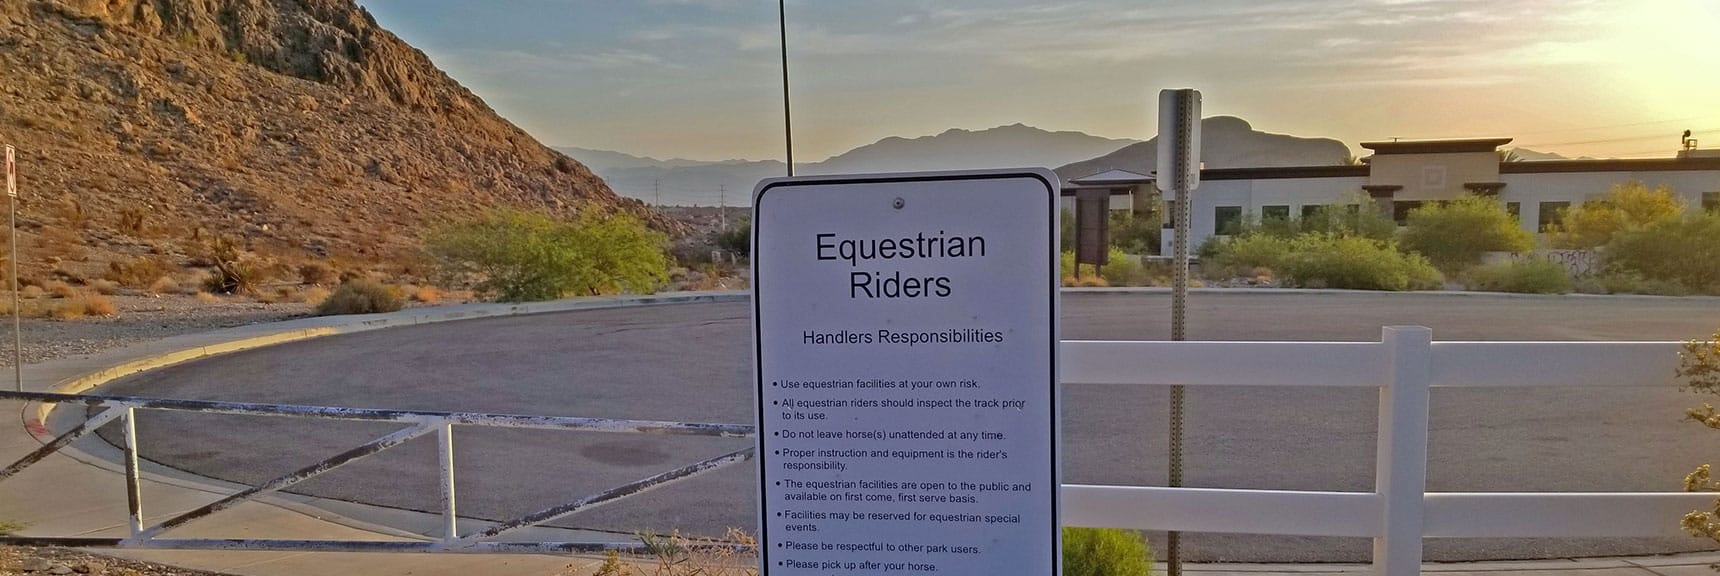 Buckskin Park Appears Geared To Equestrian Use. Many Trails to the West. | Cheyenne Mountain | Las Vegas, Nevada